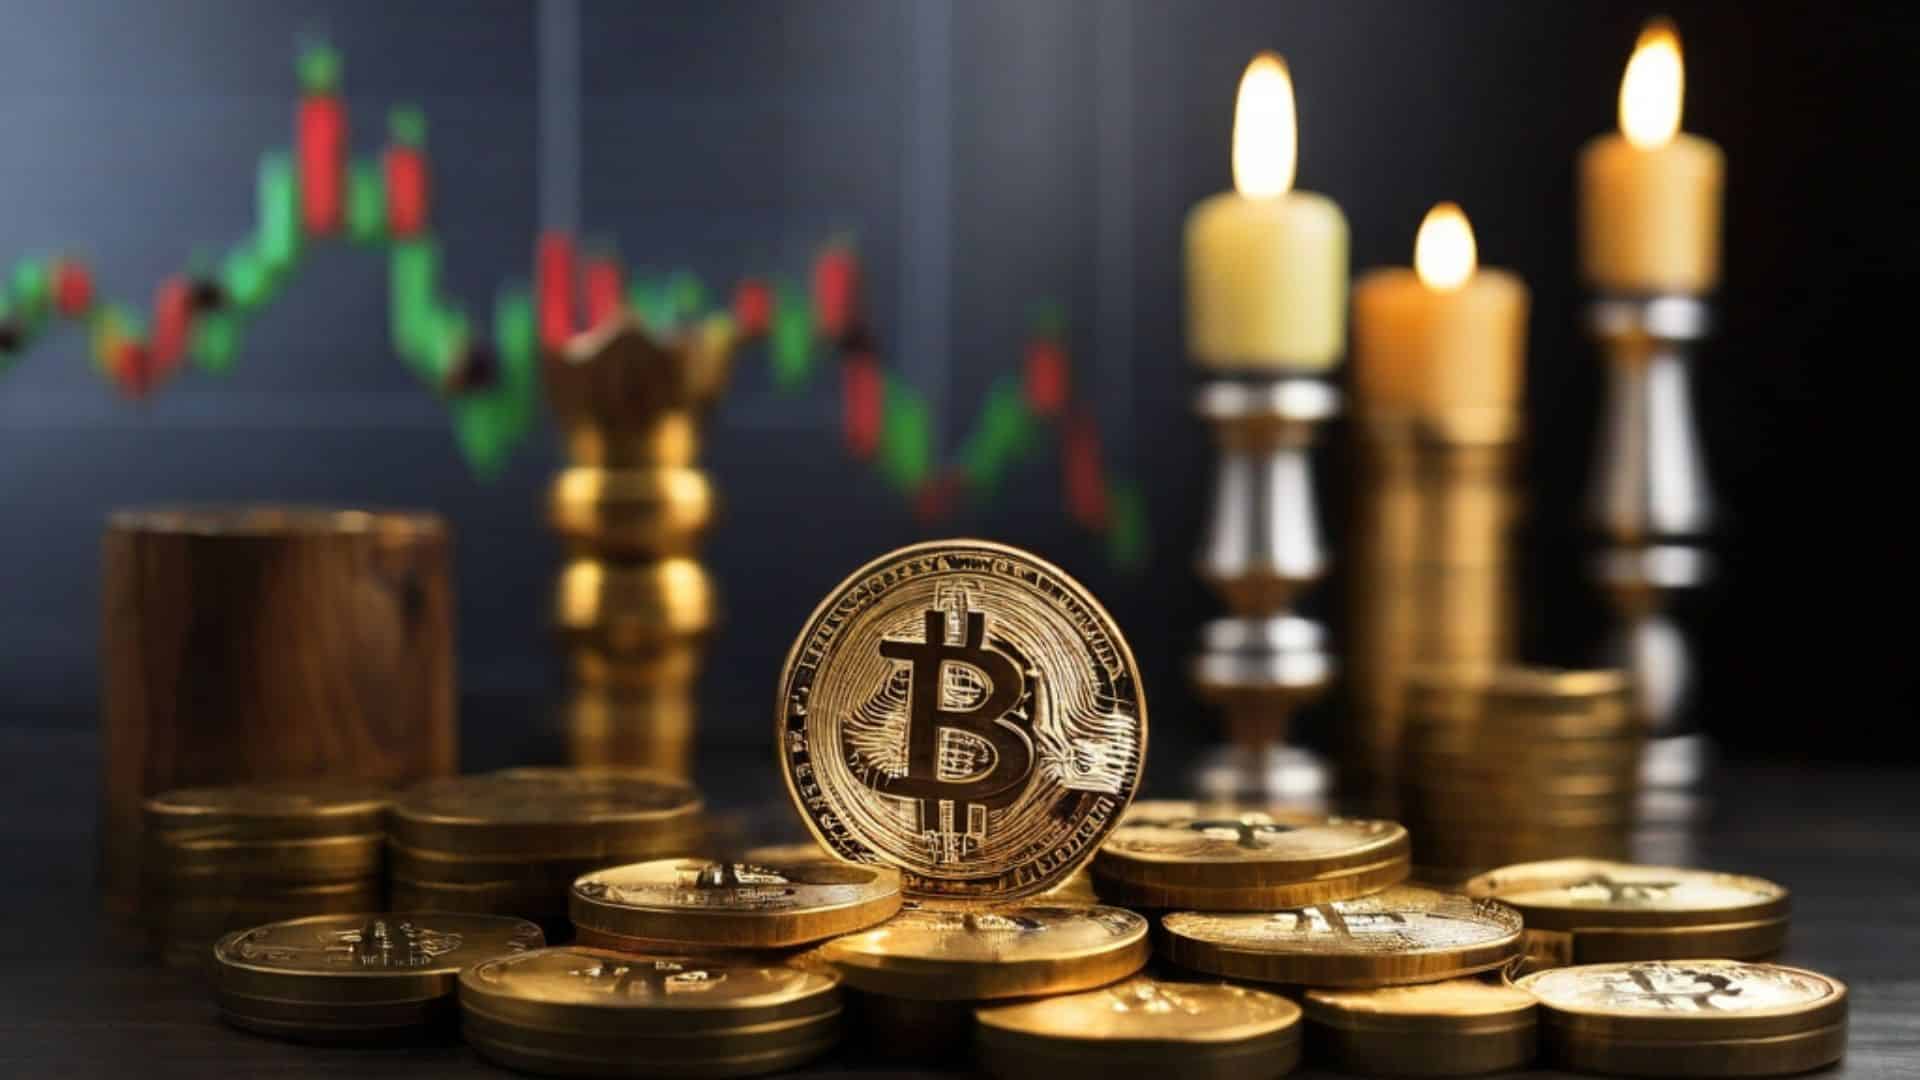 Bitcoin Price Prediction: As BlackRock Says Clients Focus ”Overwhelmingly” On BTC, Traders Flock To This Alternative That’s About To Close